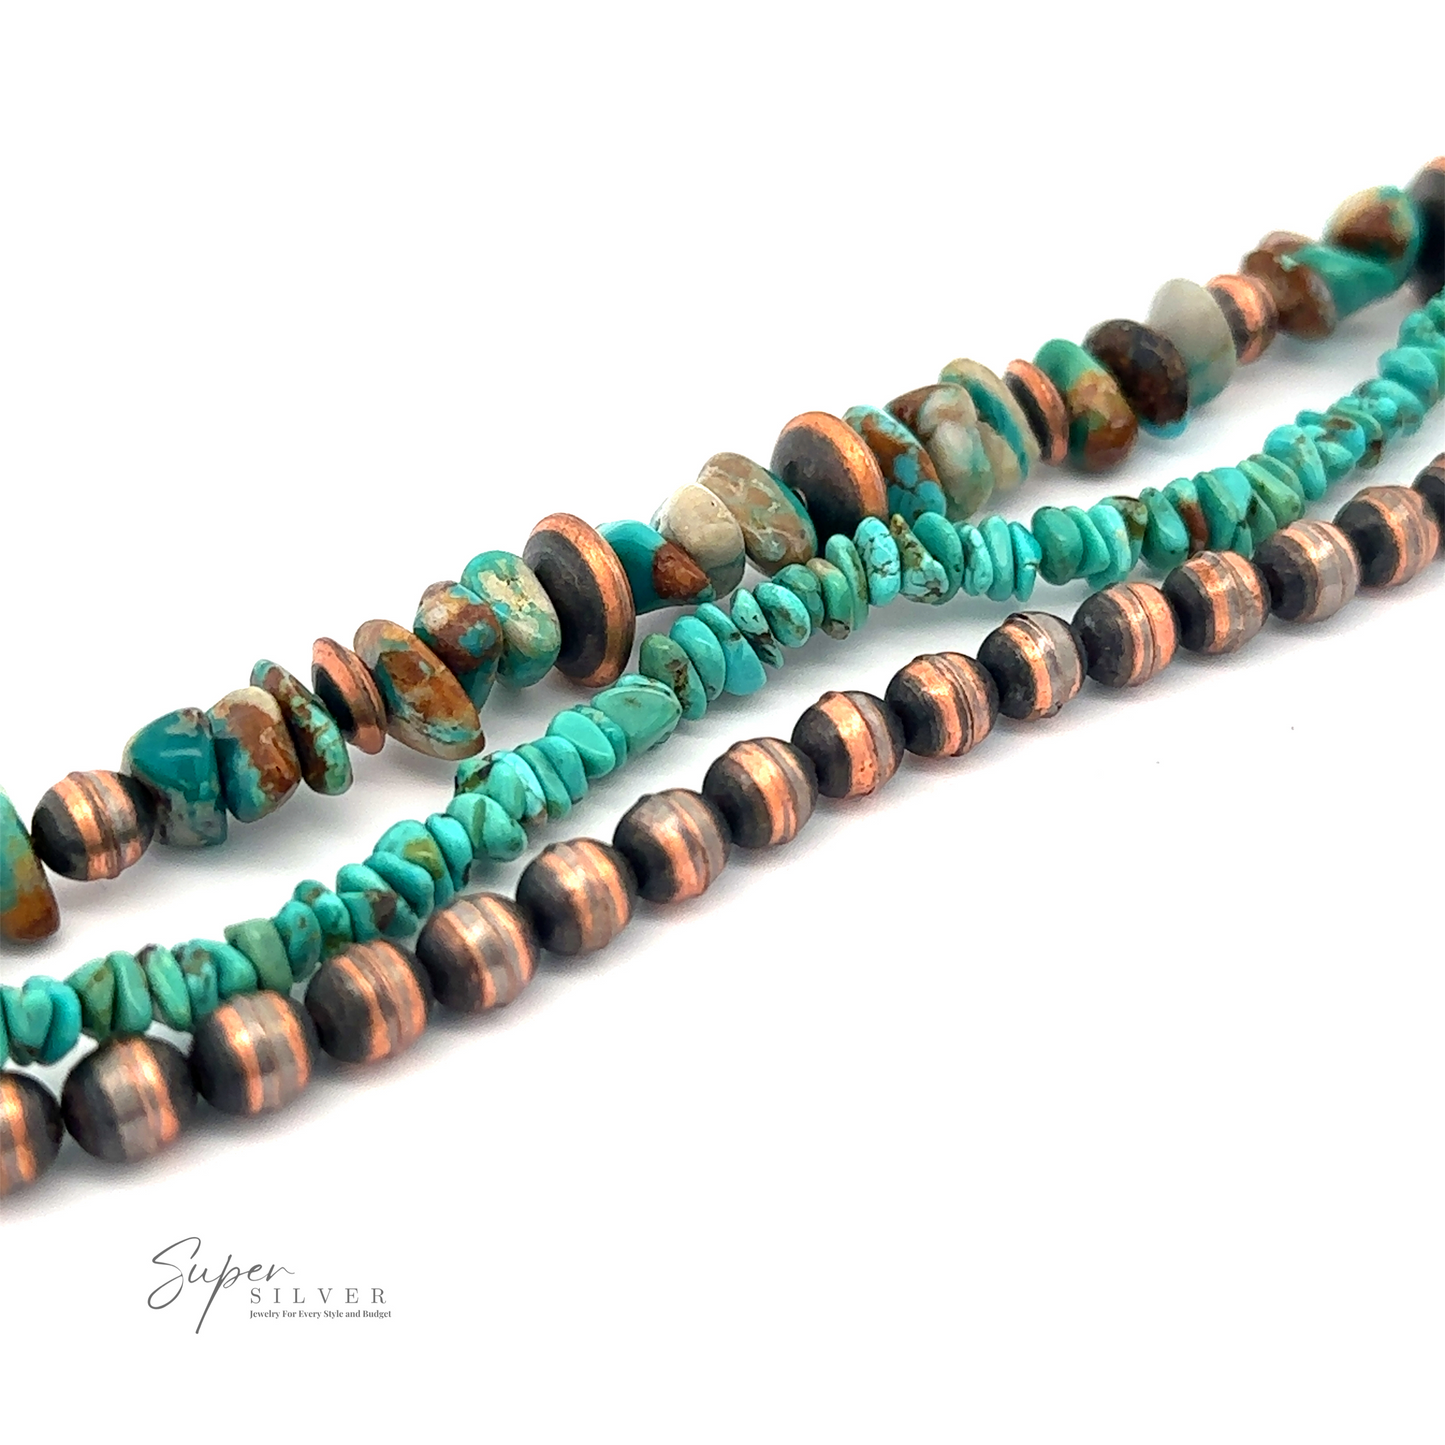 Three strands of Copper and Turquoise Native American Beaded Bracelet: one with turquoise and brown beads, one with small irregular turquoise beads, and one with round silver and brown beads; "Super Silver" logo in the corner.